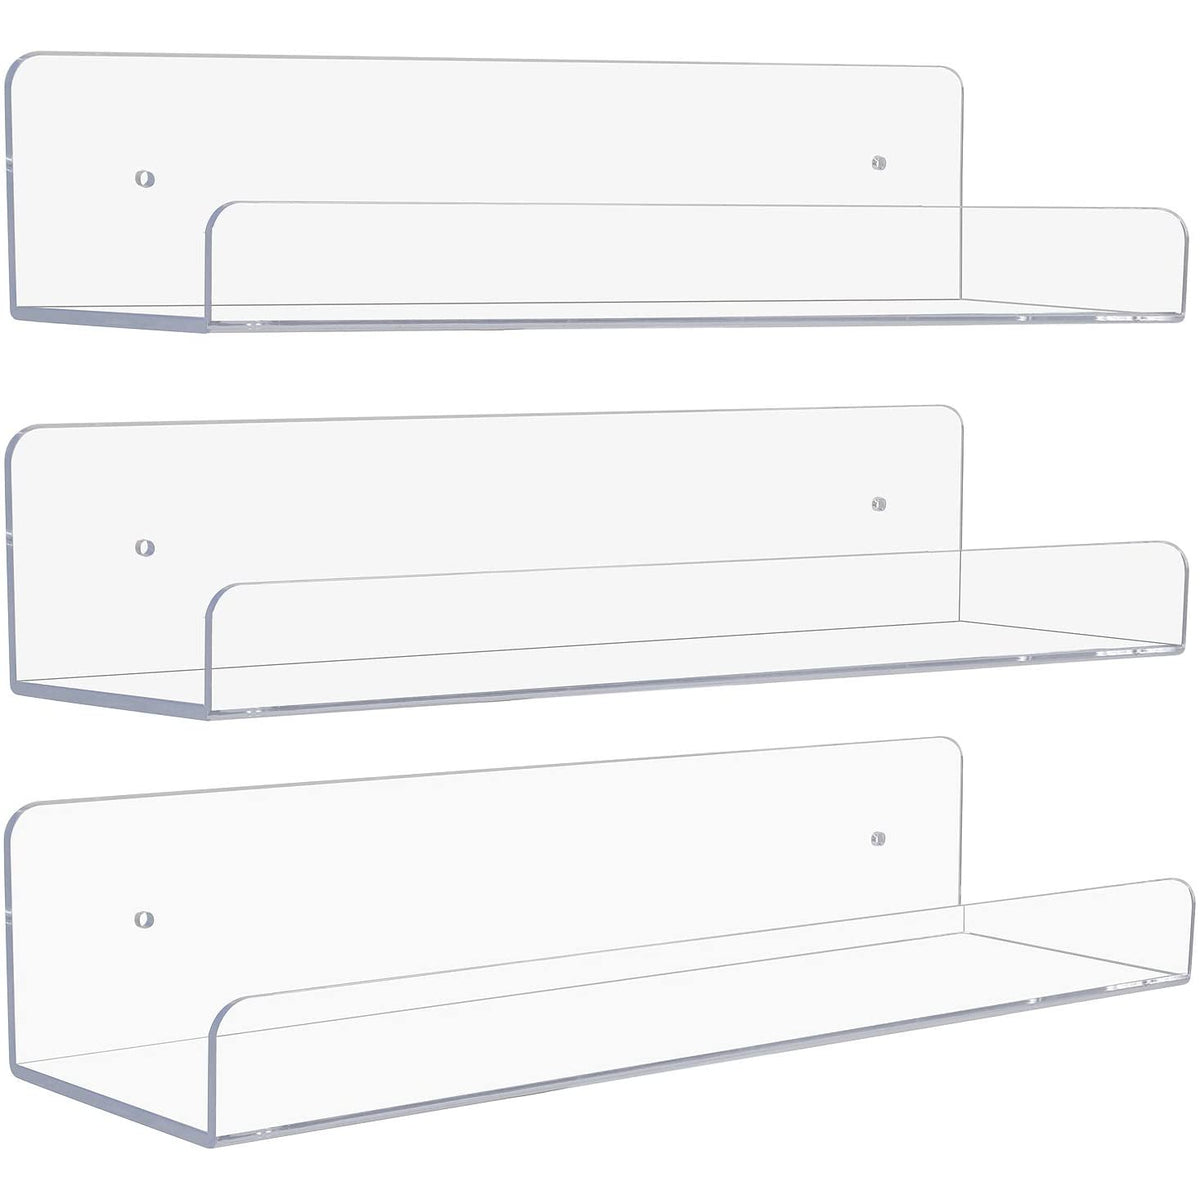 Sorbus Acrylic Wall Floating Shelf Rack Organizer for Home, Bath and More